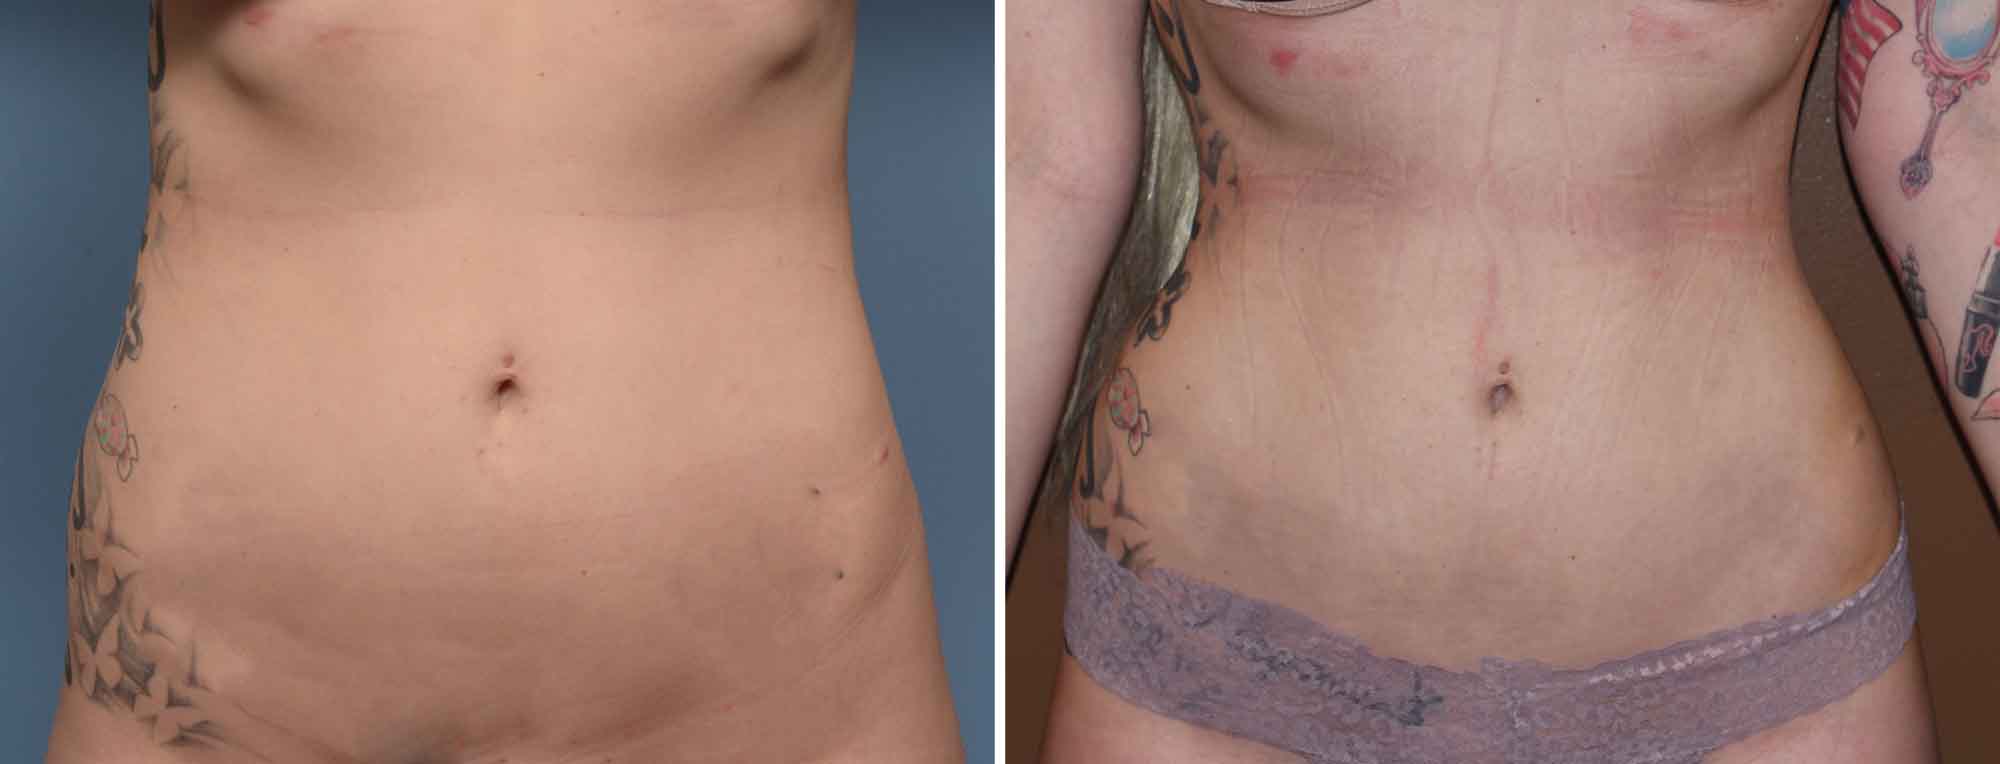 Clinic Snapshots - The Results of Rib Removal for Waistline Narrowing -  Explore Plastic Surgery